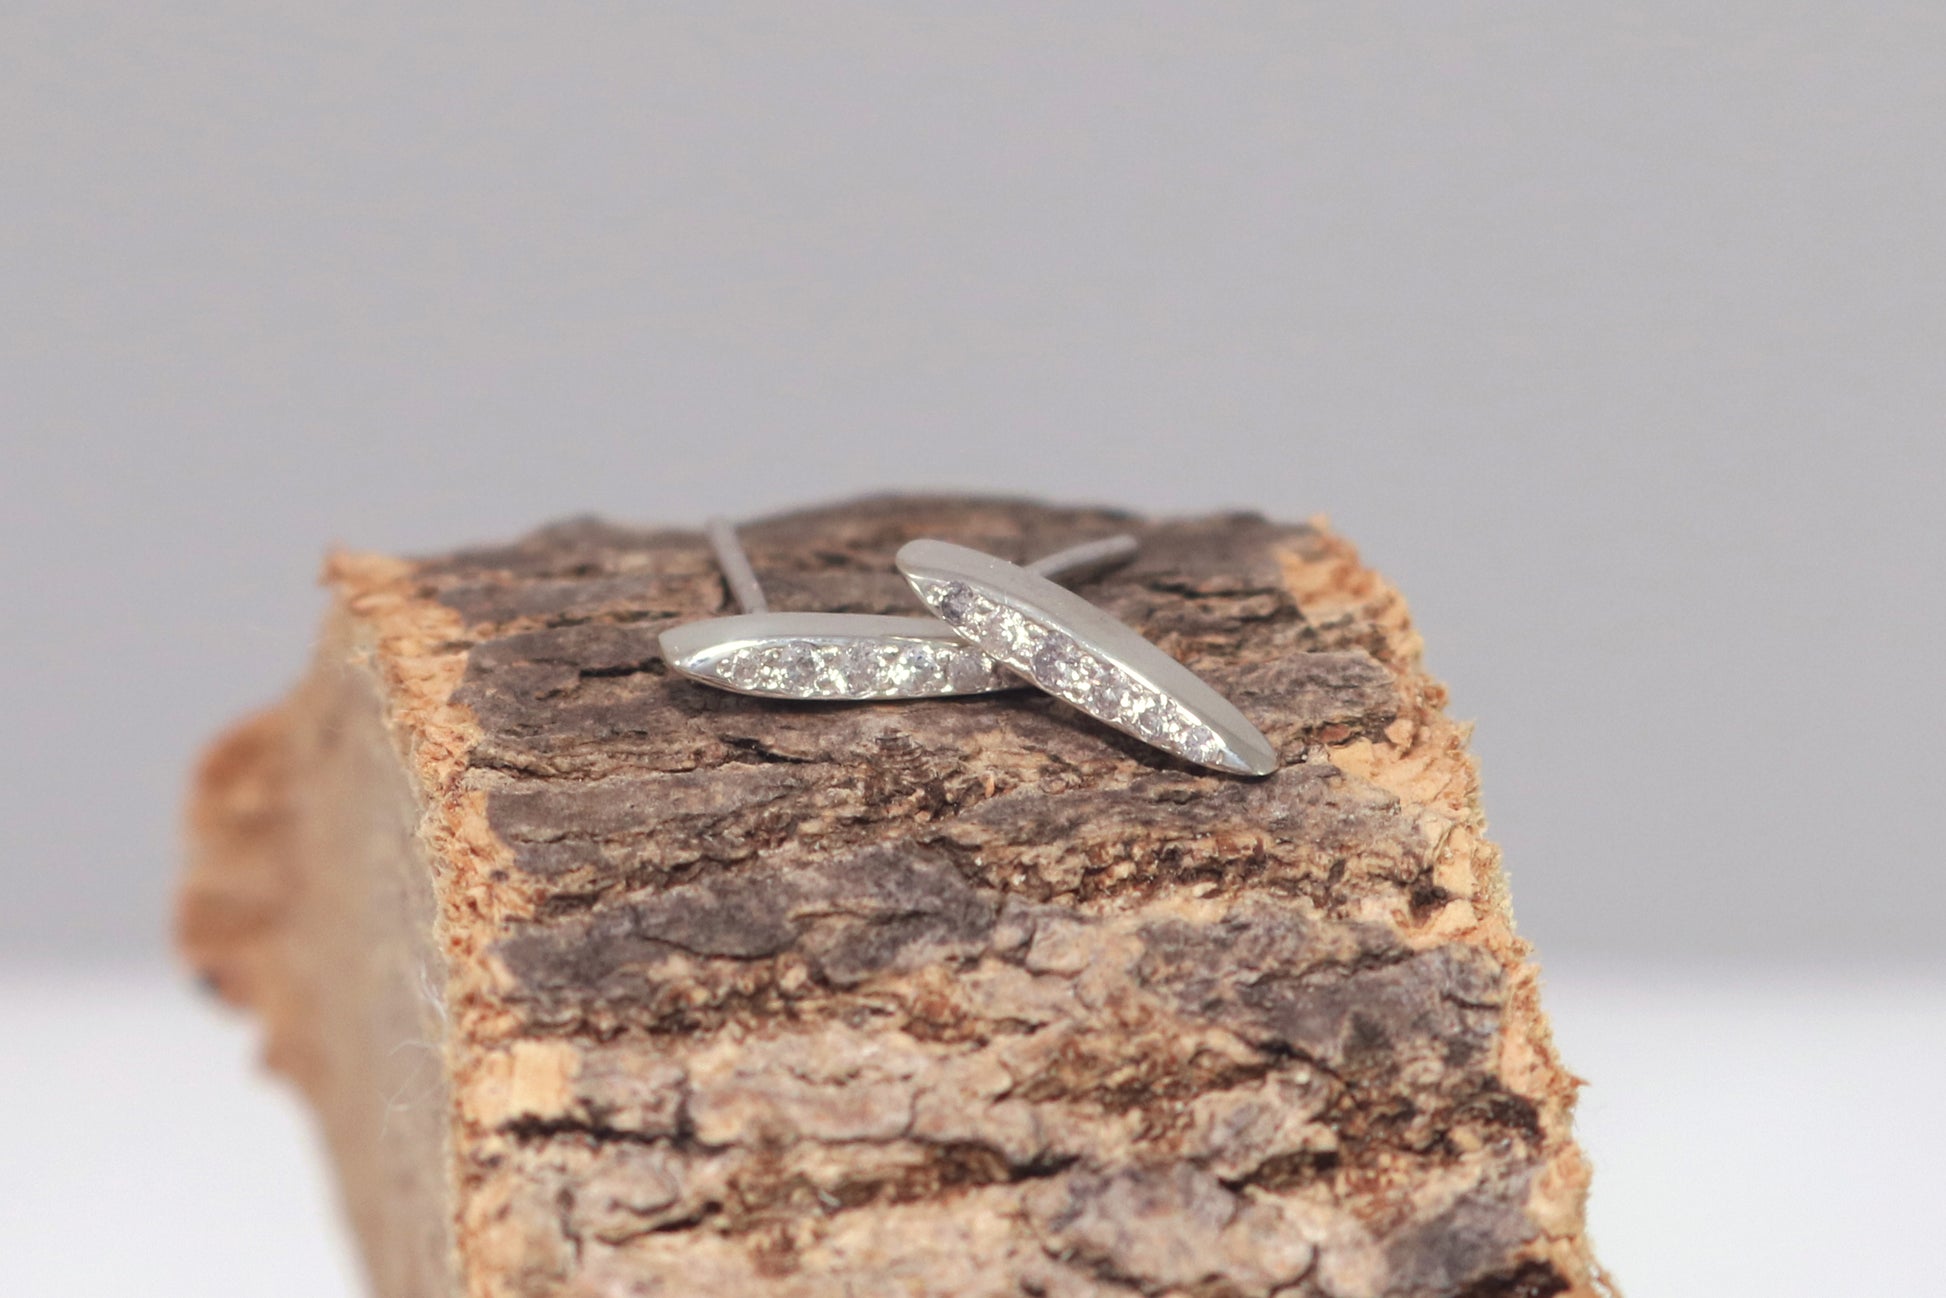 Studs made from solid sterling silver, shaped like a pointed ellipse, bead set with 6 diamonds descending in size.